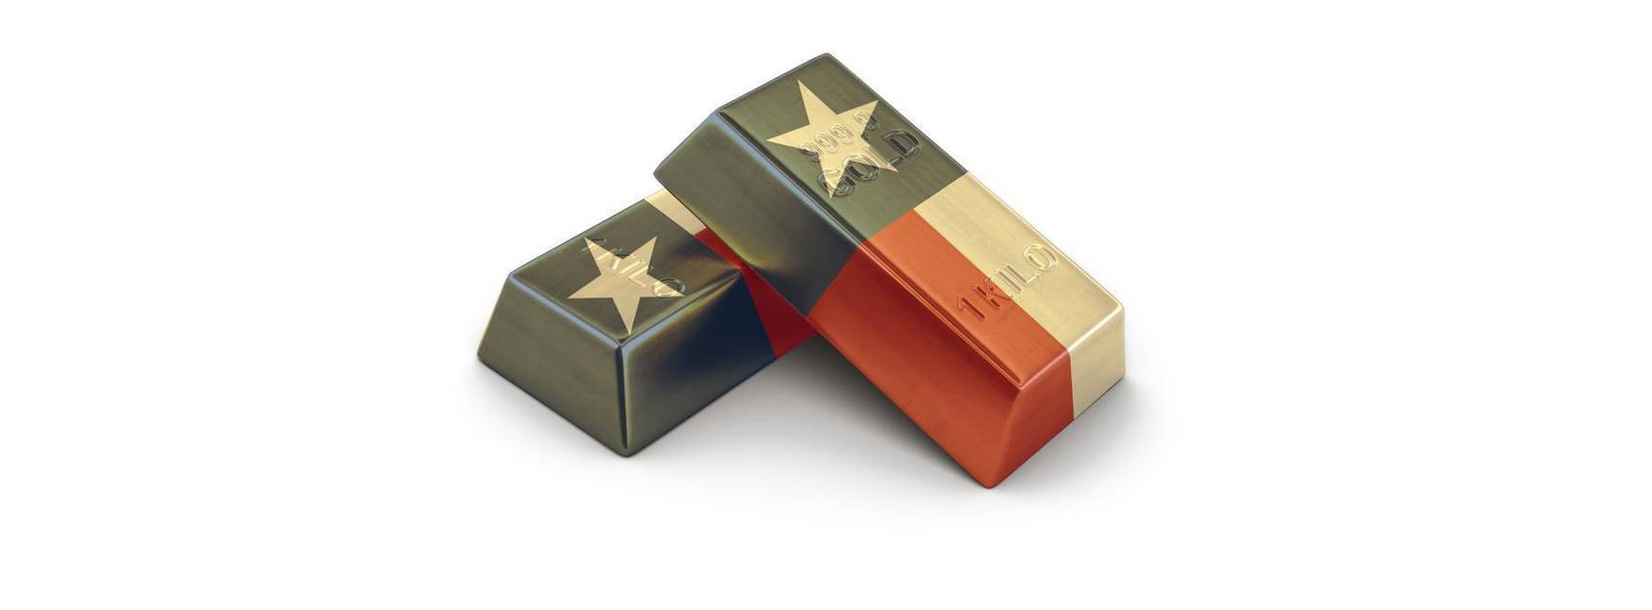 Could Texans soon be playing the gold card?